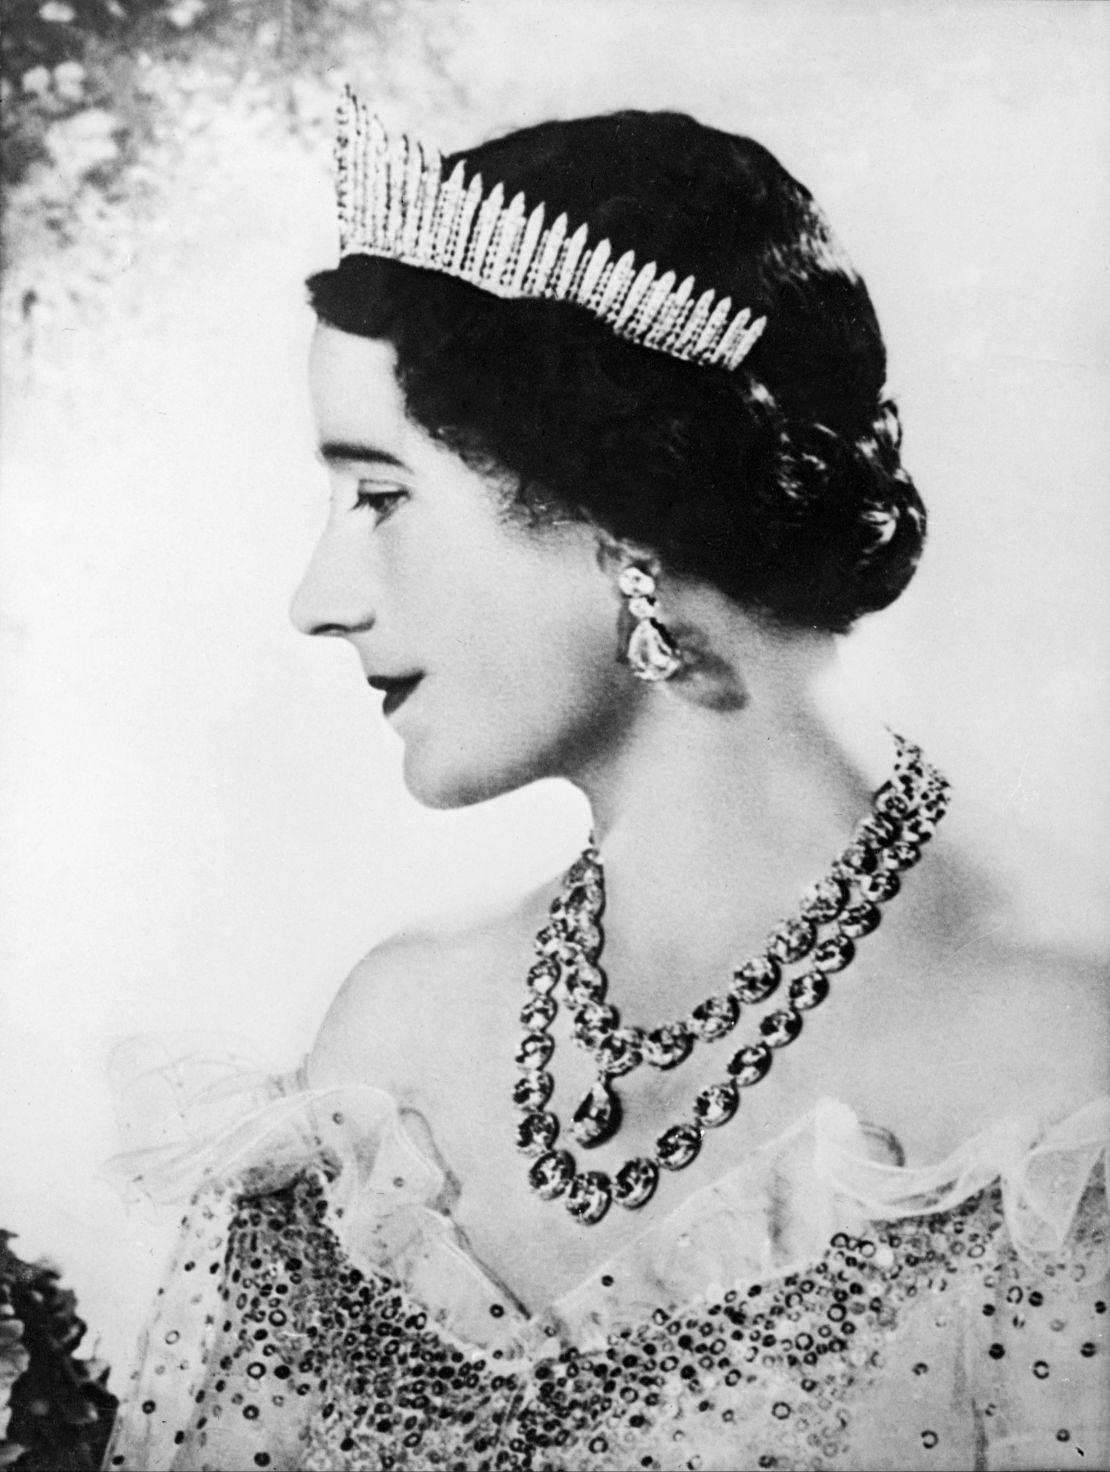 A 1937 photo of Queen Elizabeth, who became the Queen Mother after her husband's death.